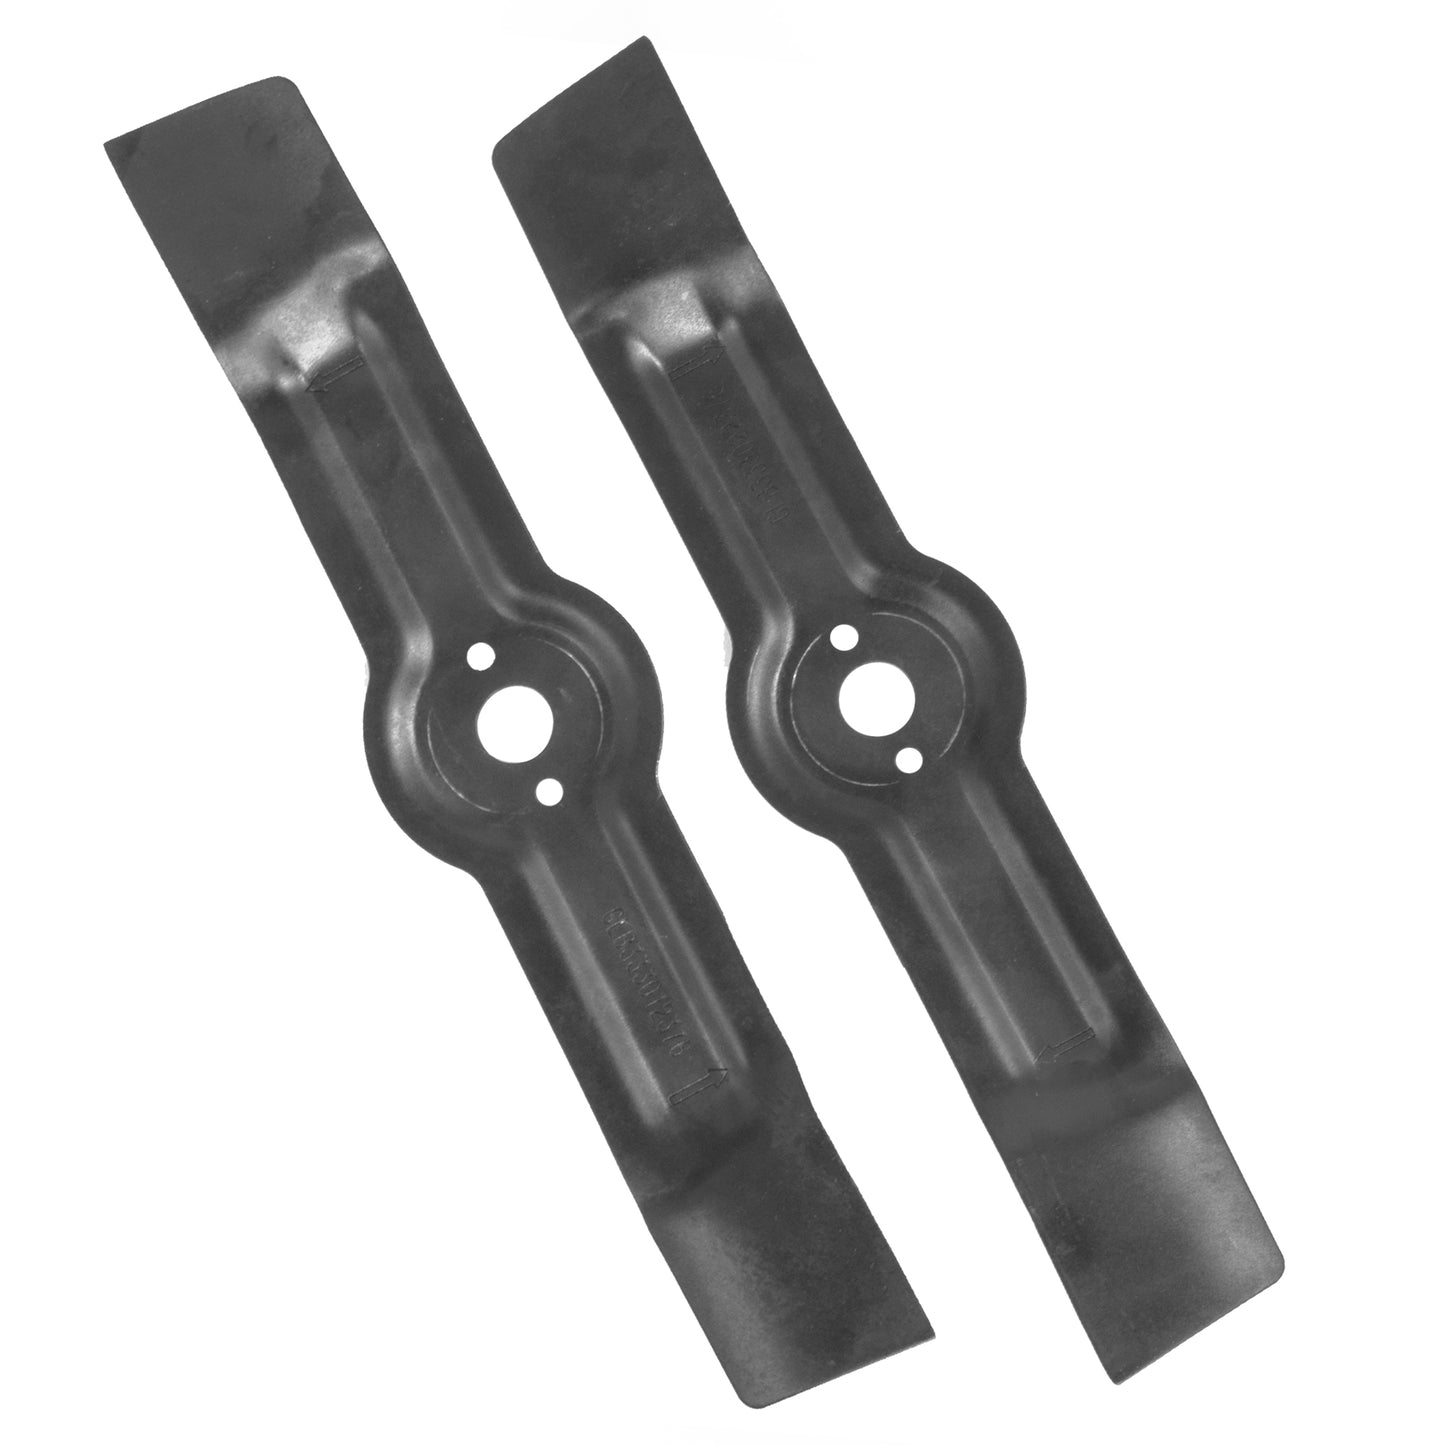 25" Replacement Lawn Mower Blades (2-Pack)